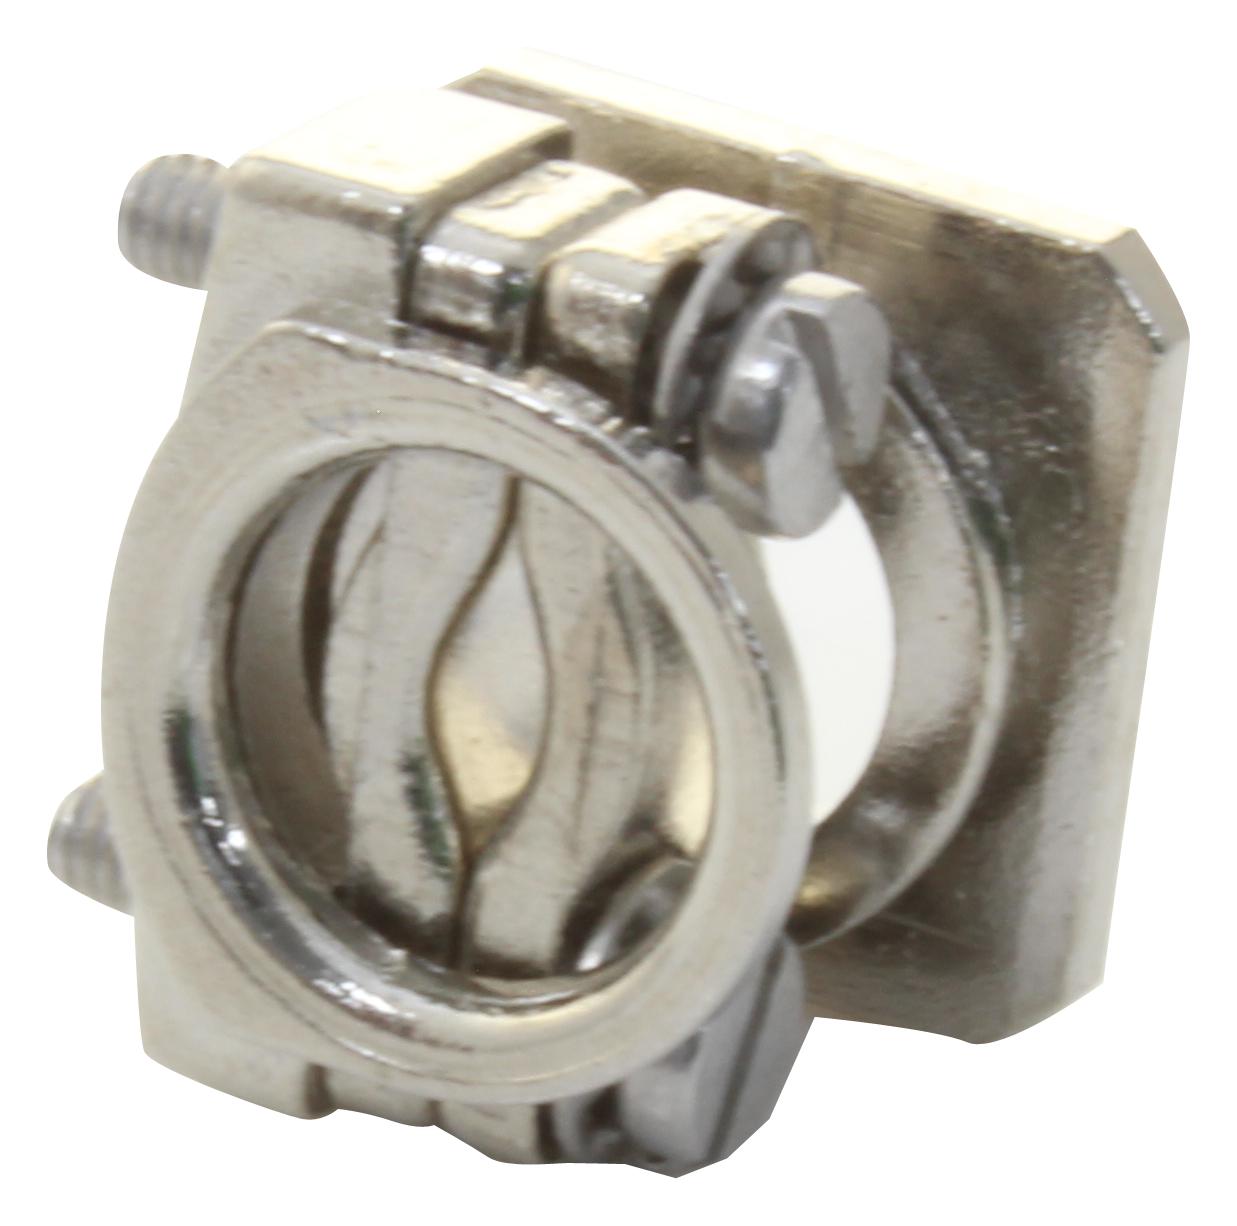 532900006 CABLE CLAMP, 3MM, CIRCULAR CONNECTOR JAEGER